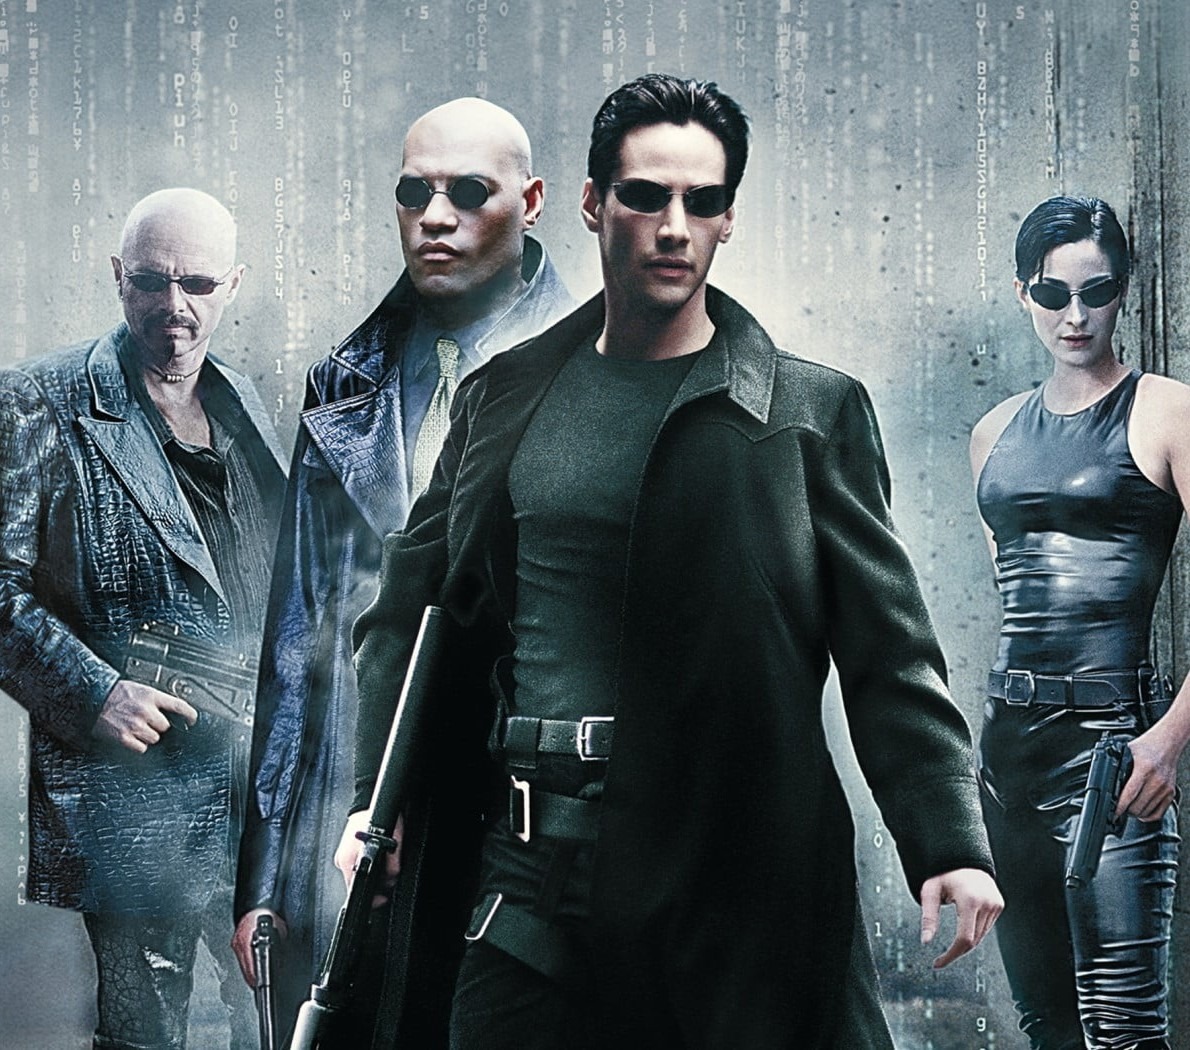 Keanu Reeves will return as Neo in The Matrix 4